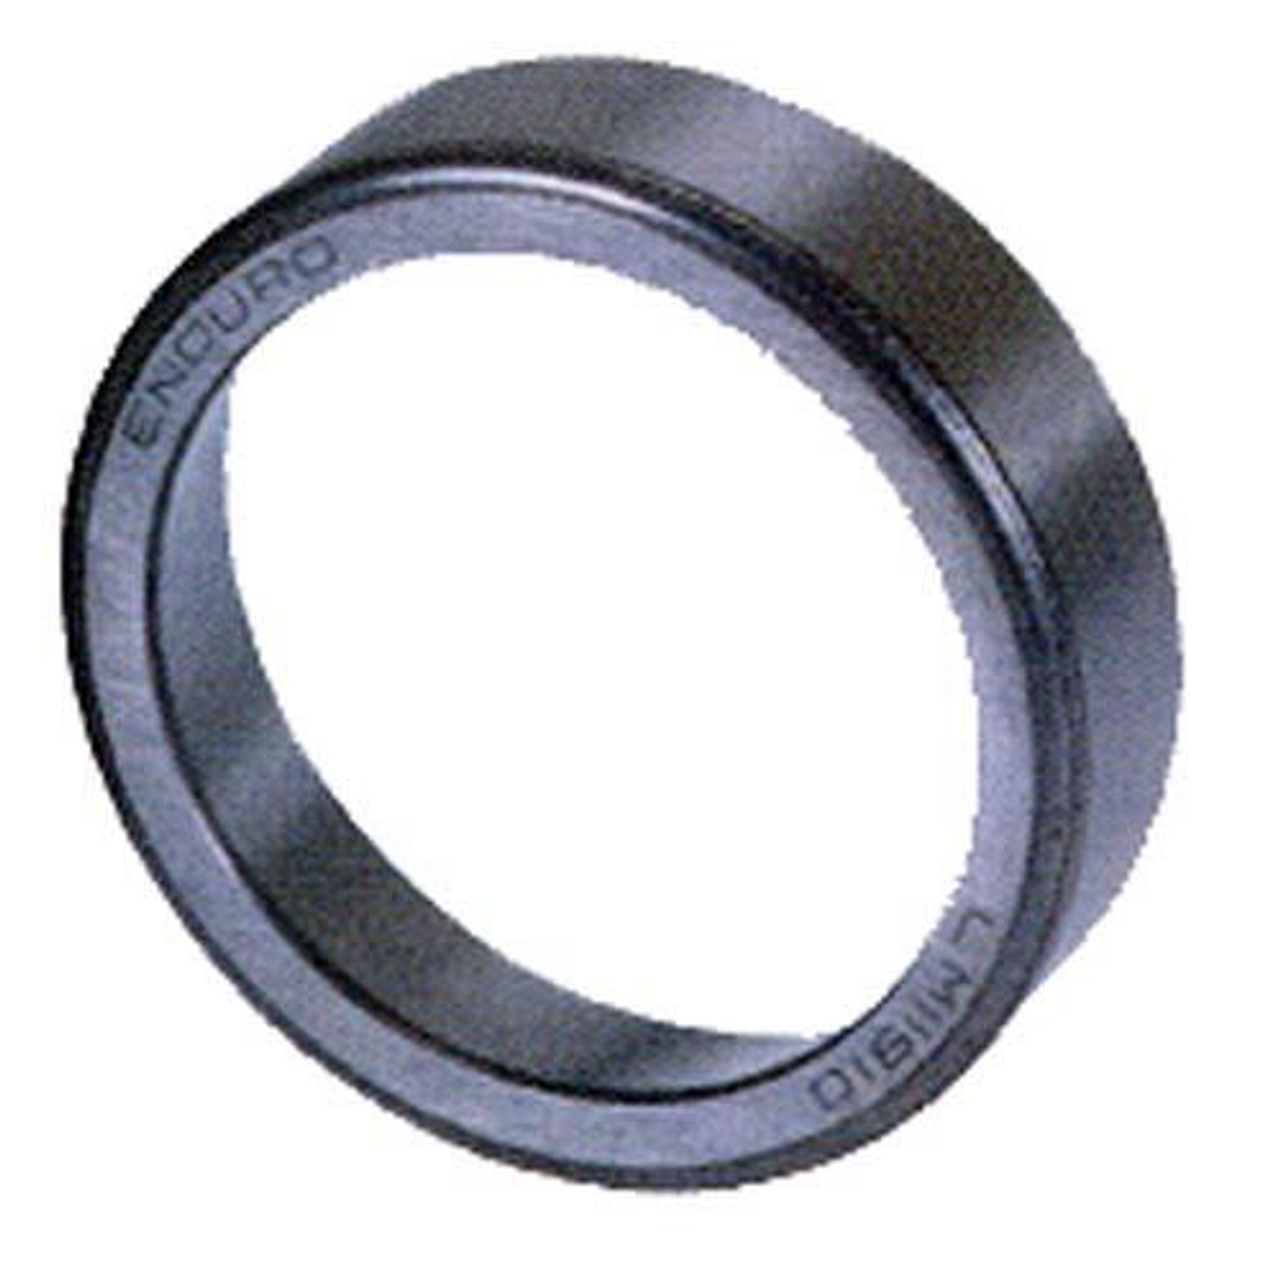 Bearing Cup L44610 Cue, 3707, 48300-60